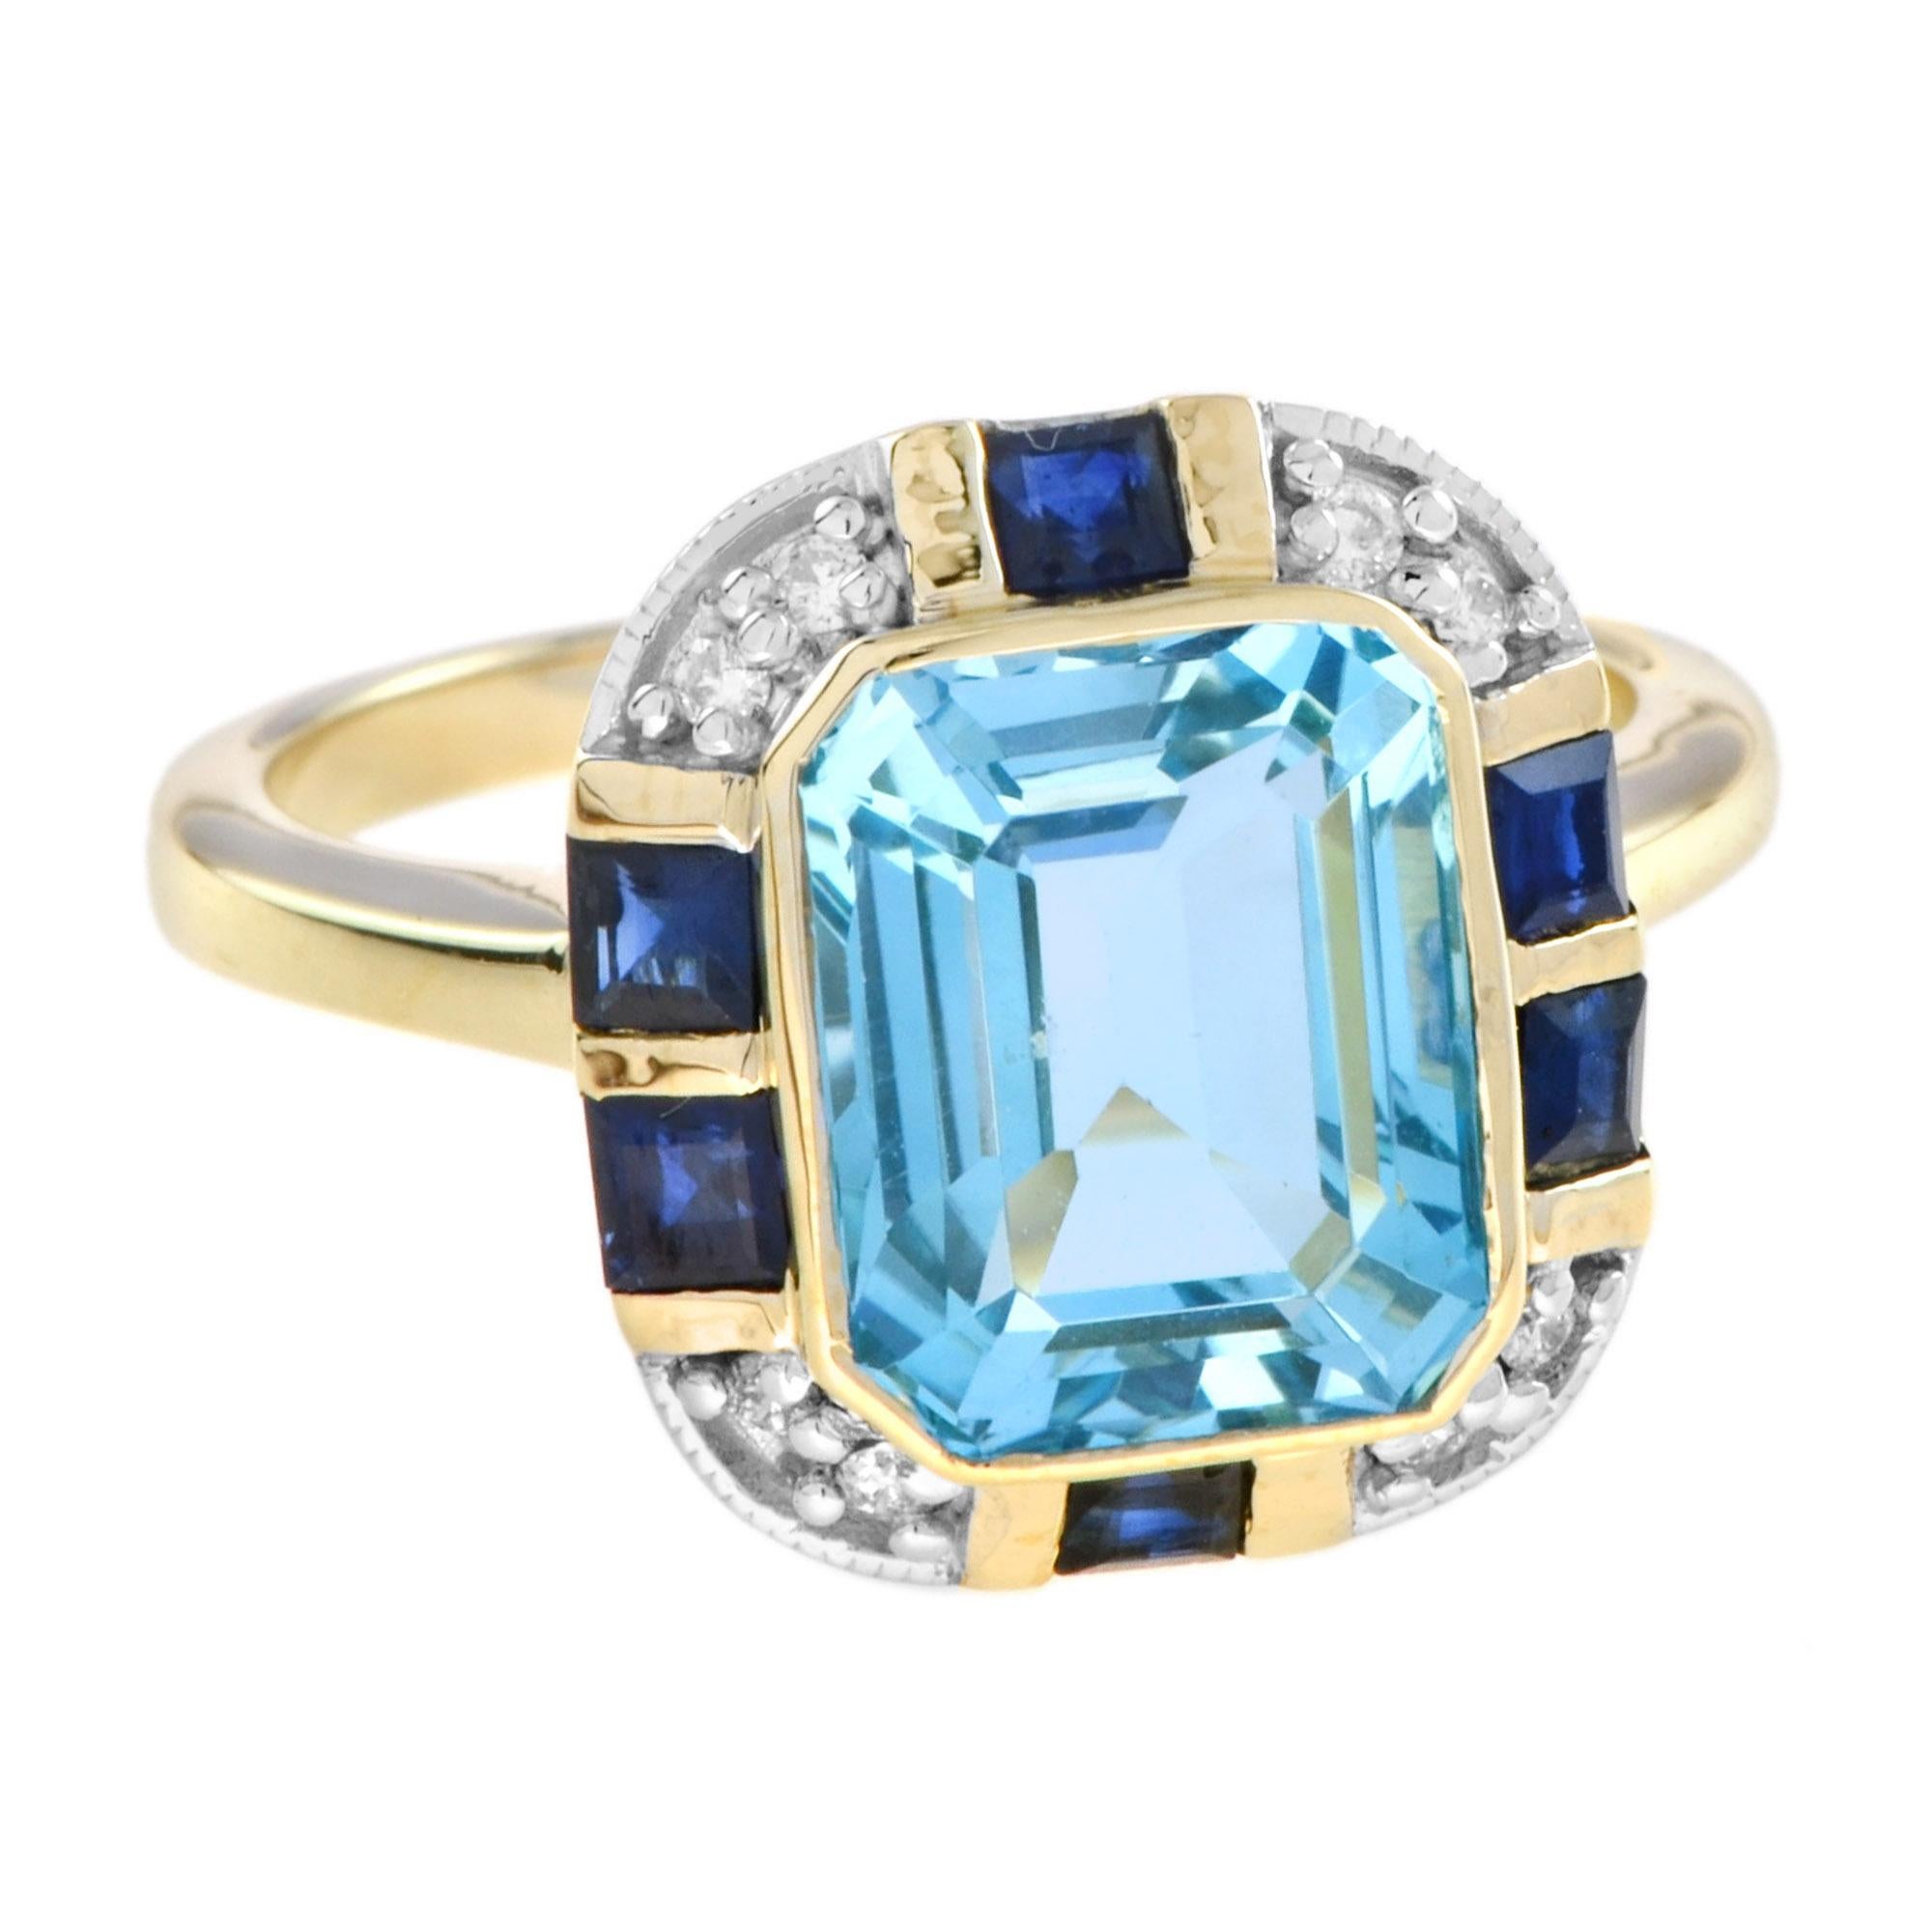 For Sale:  Art Deco Style Blue Topaz Sapphire and Diamond Ring in White Top Yellow Gold 3